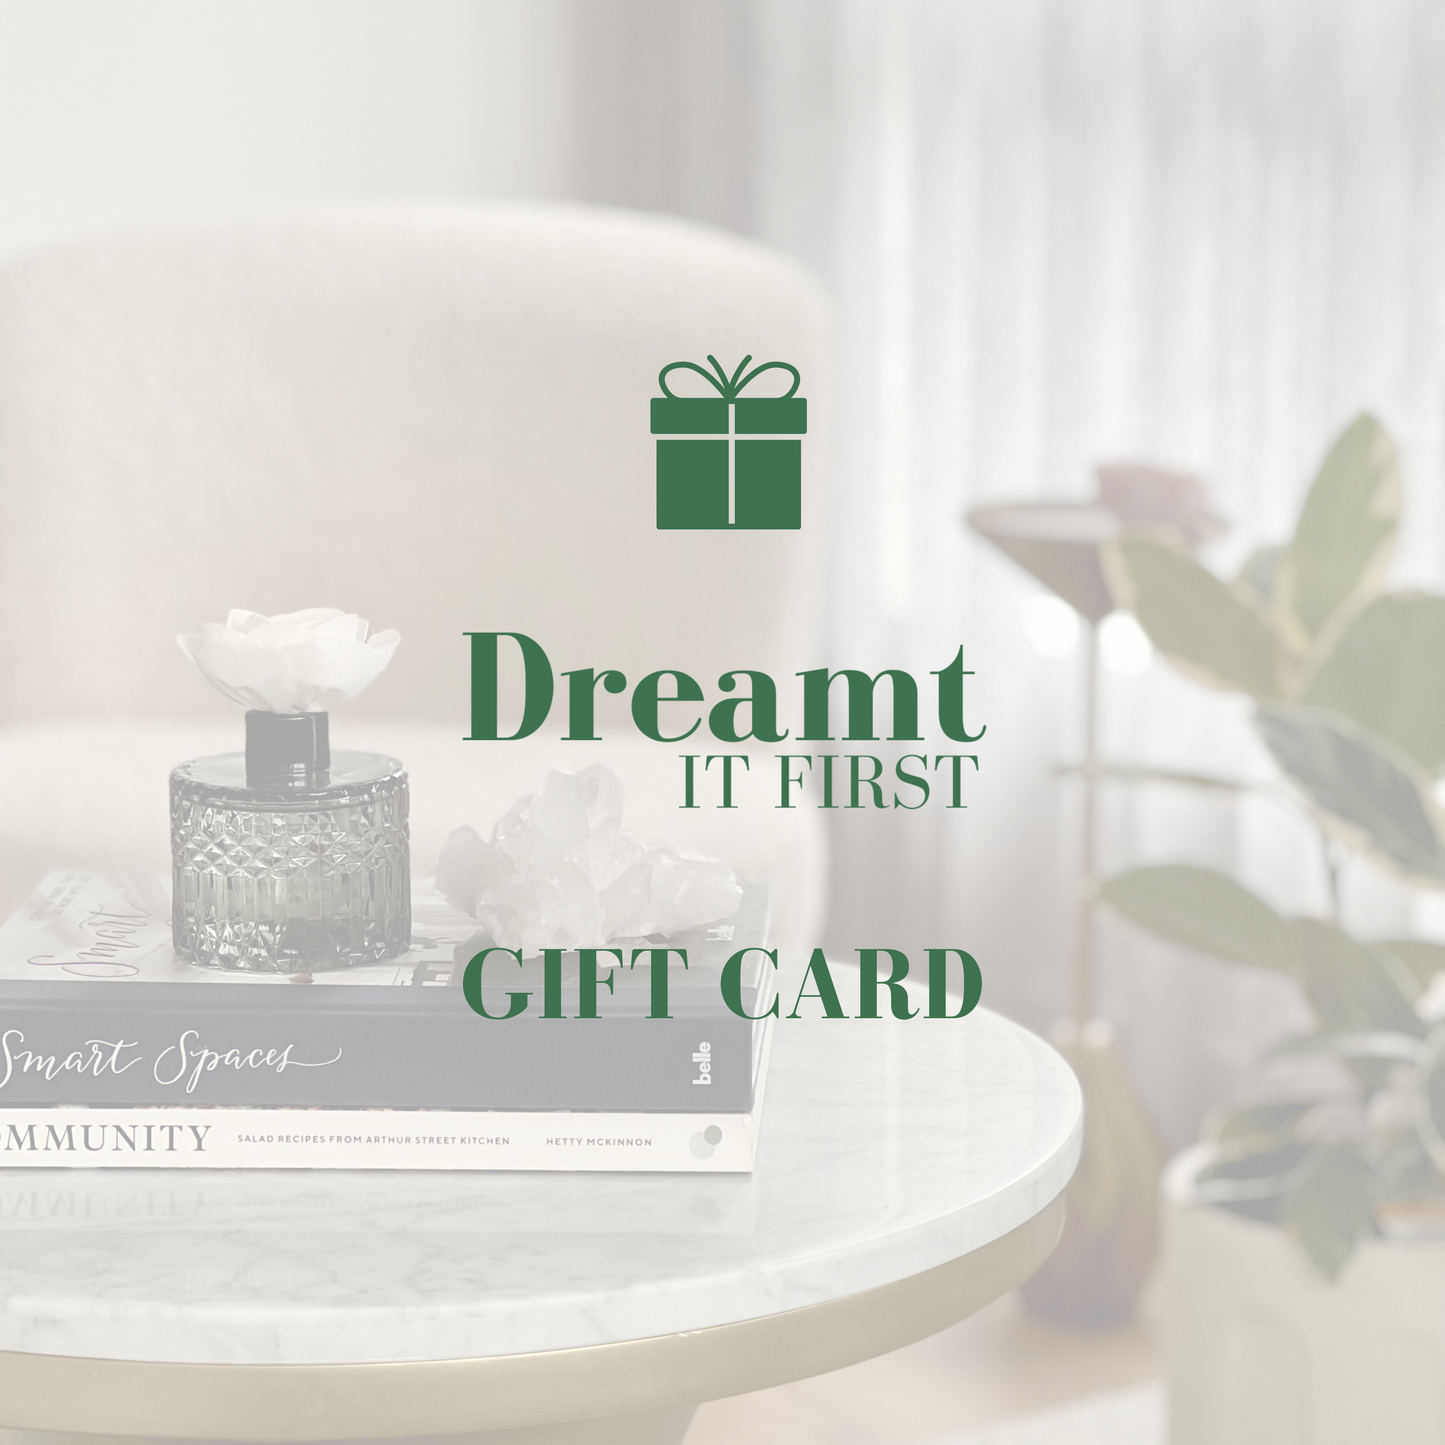 Dreamt it first Gift cards